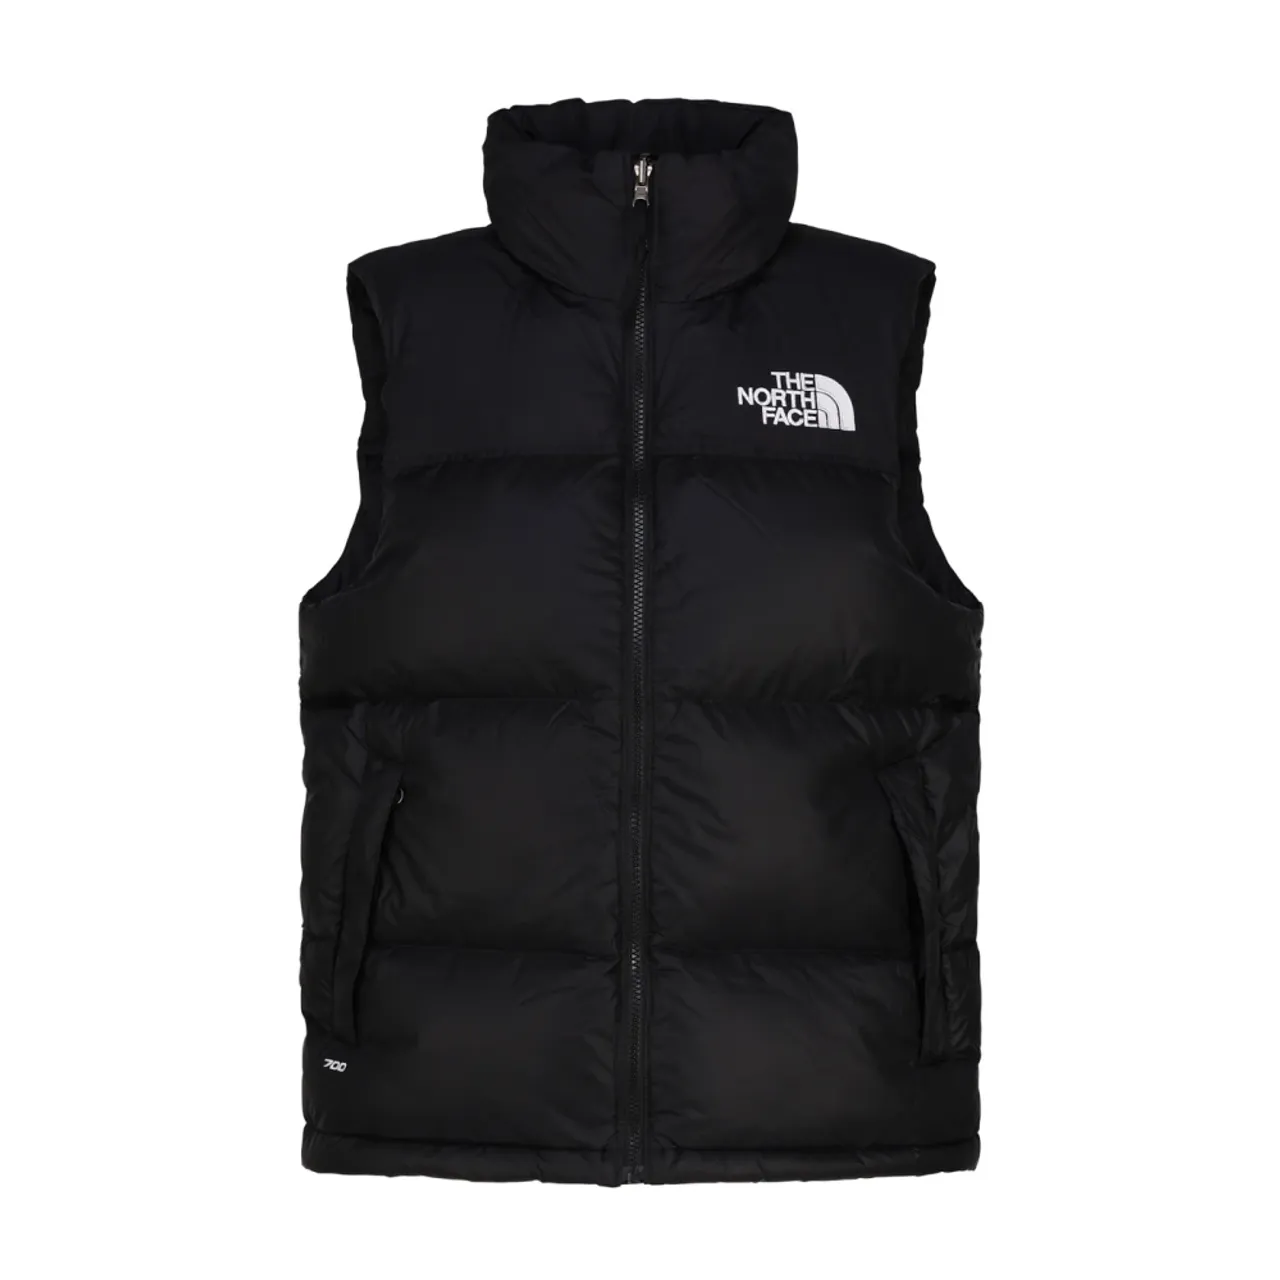 The North Face , Black Nylon Zip Jacket with Hood ,Black male, Sizes: